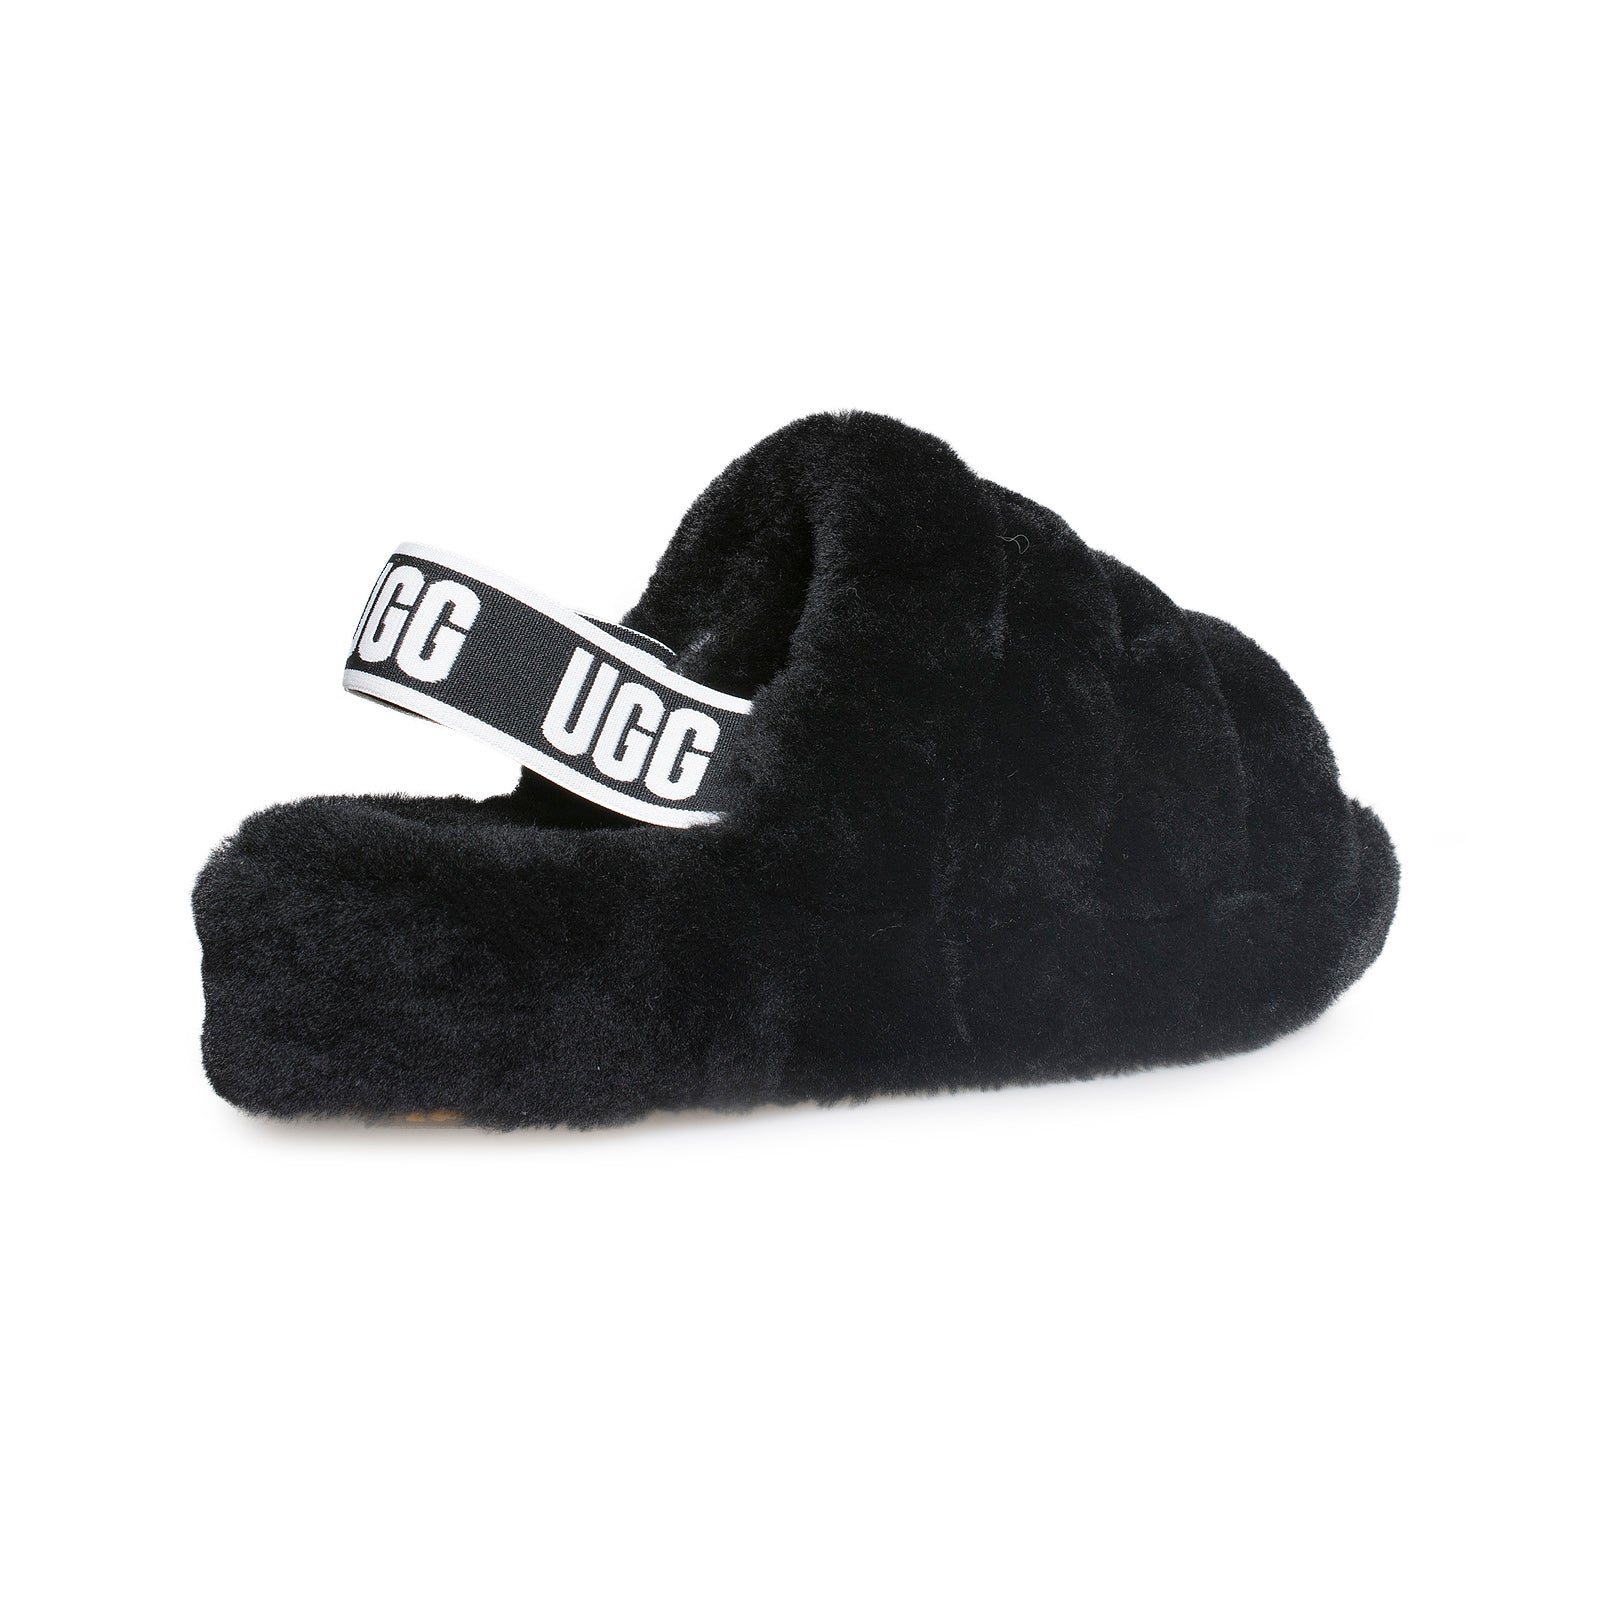 black slippers womens shoes